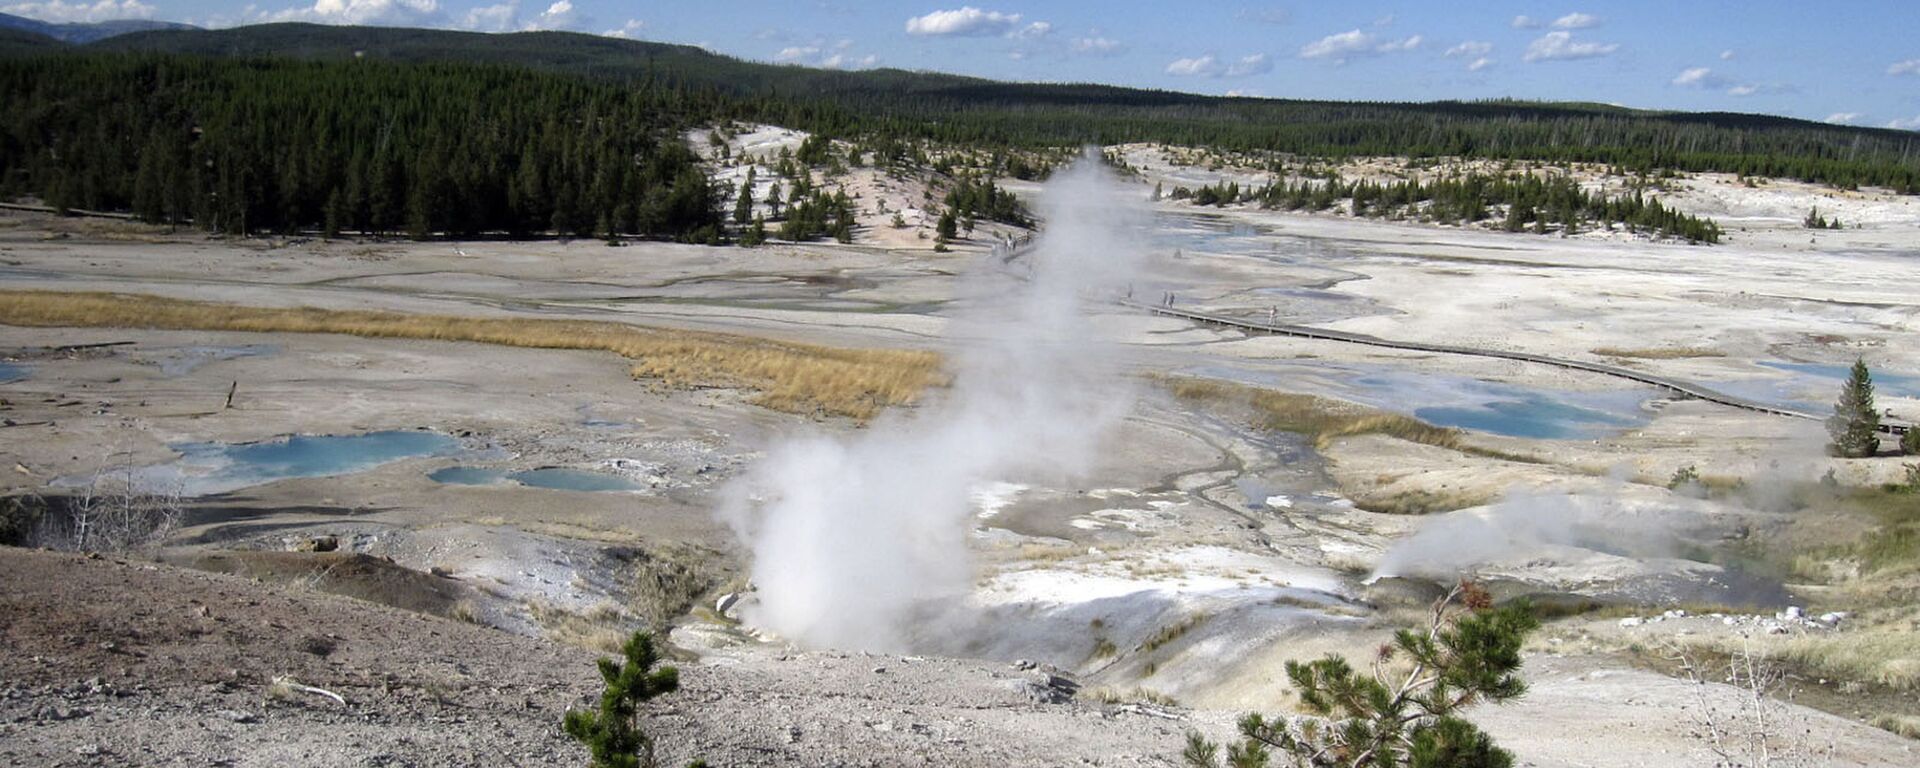 This September, 2009 file photo shows the Norris Geyser Basin in Yellowstone National Park, Wyo. Rangers are navigating a dangerous landscape where boiling water flows beneath a fragile rock crust as they search for a man who reportedly fell into a hot spring at Yellowstone National Park. Officials say the safety of park personnel was a top concern during the search in the popular Norris Geyser Basin. The man is presumed dead.  - Sputnik International, 1920, 19.06.2022